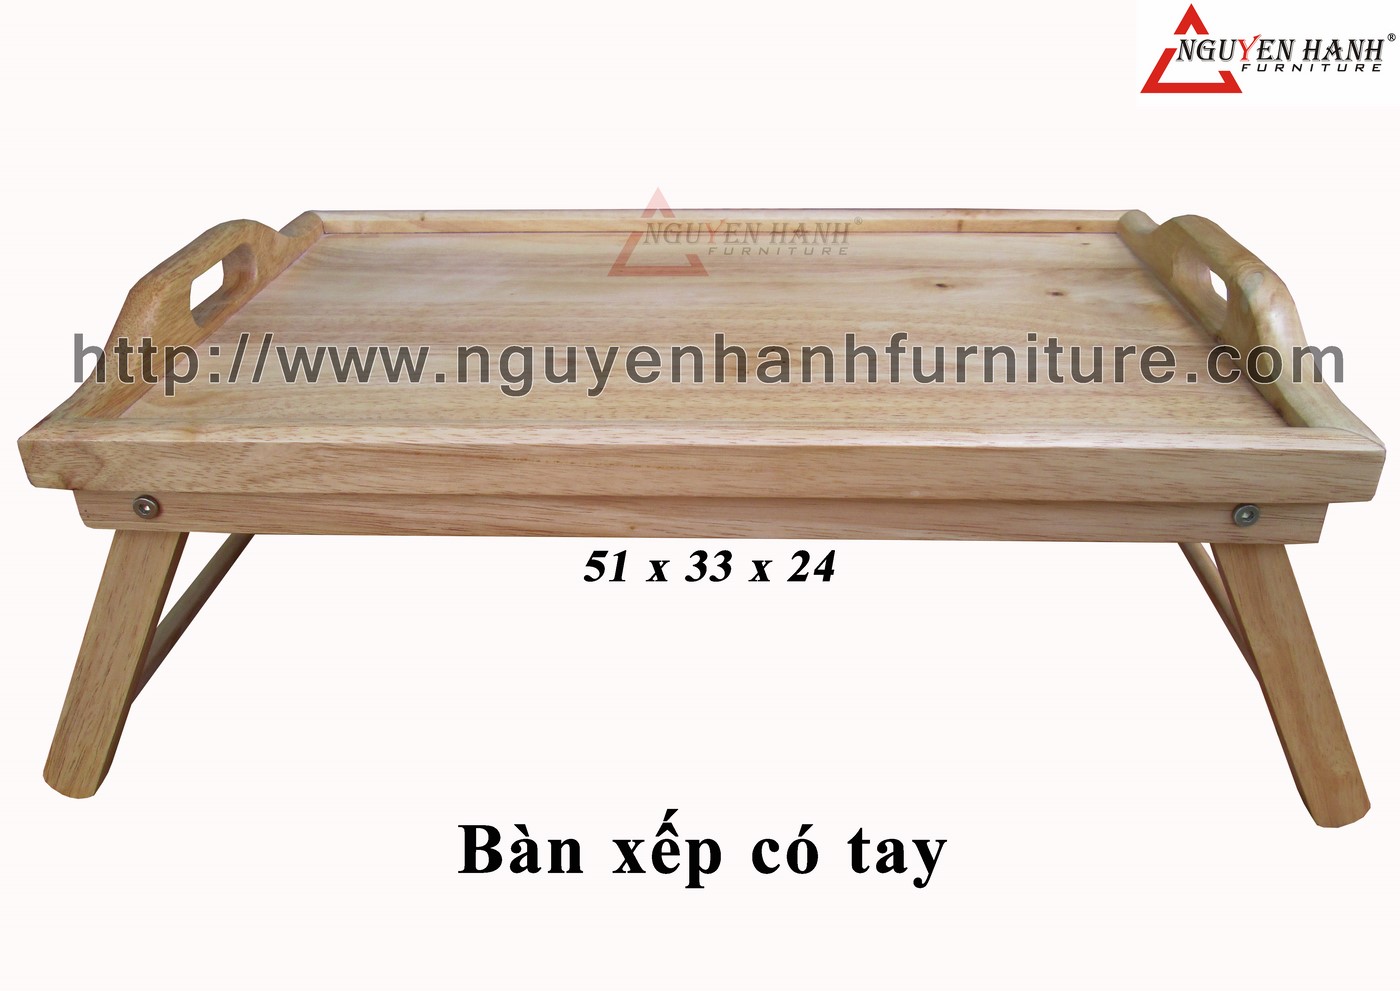 Name product: Tables tray (Natural) - Dimensions: 51 x 33 x 24 - Description: Wood natural rubber